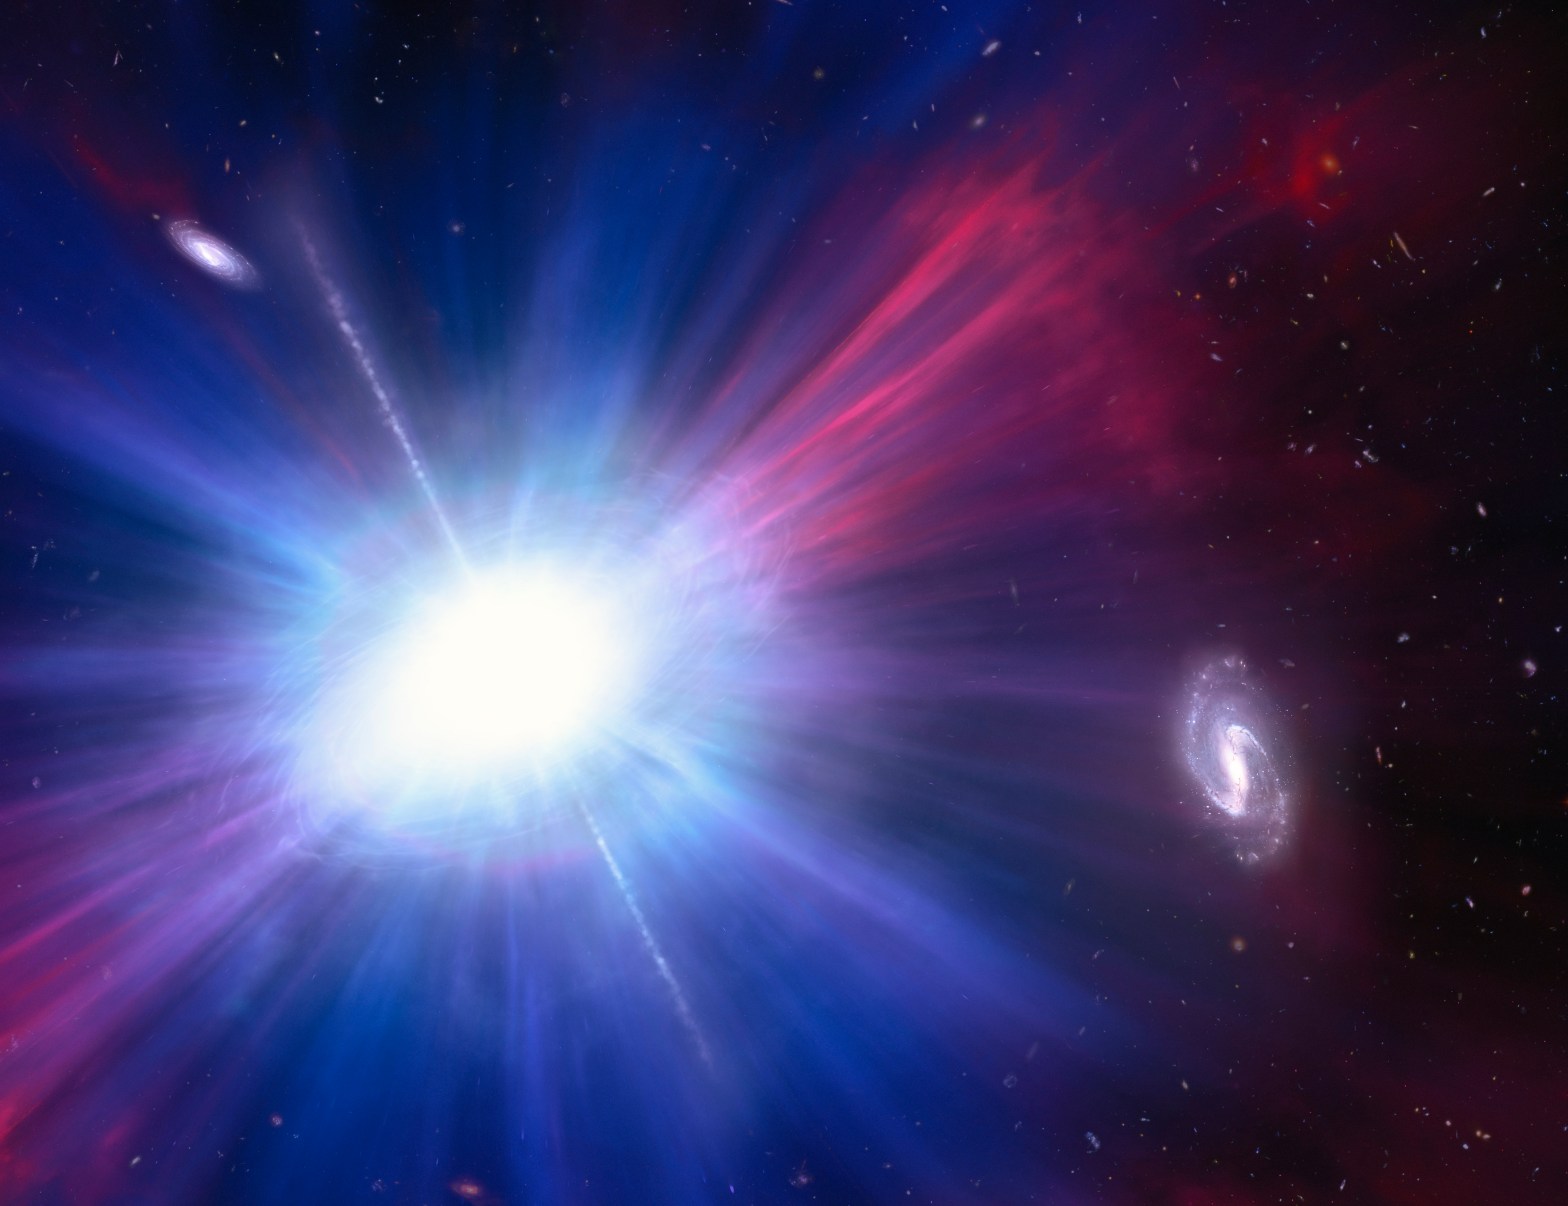 An artist’s representation of one of brightest explosions ever seen in space, an LFBOT. Called a Luminous Fast Blue Optical Transient (LFBOT). Credit: NASA, ESA, NSF's NOIRLab, Mark Garlick , Mahdi Zamani